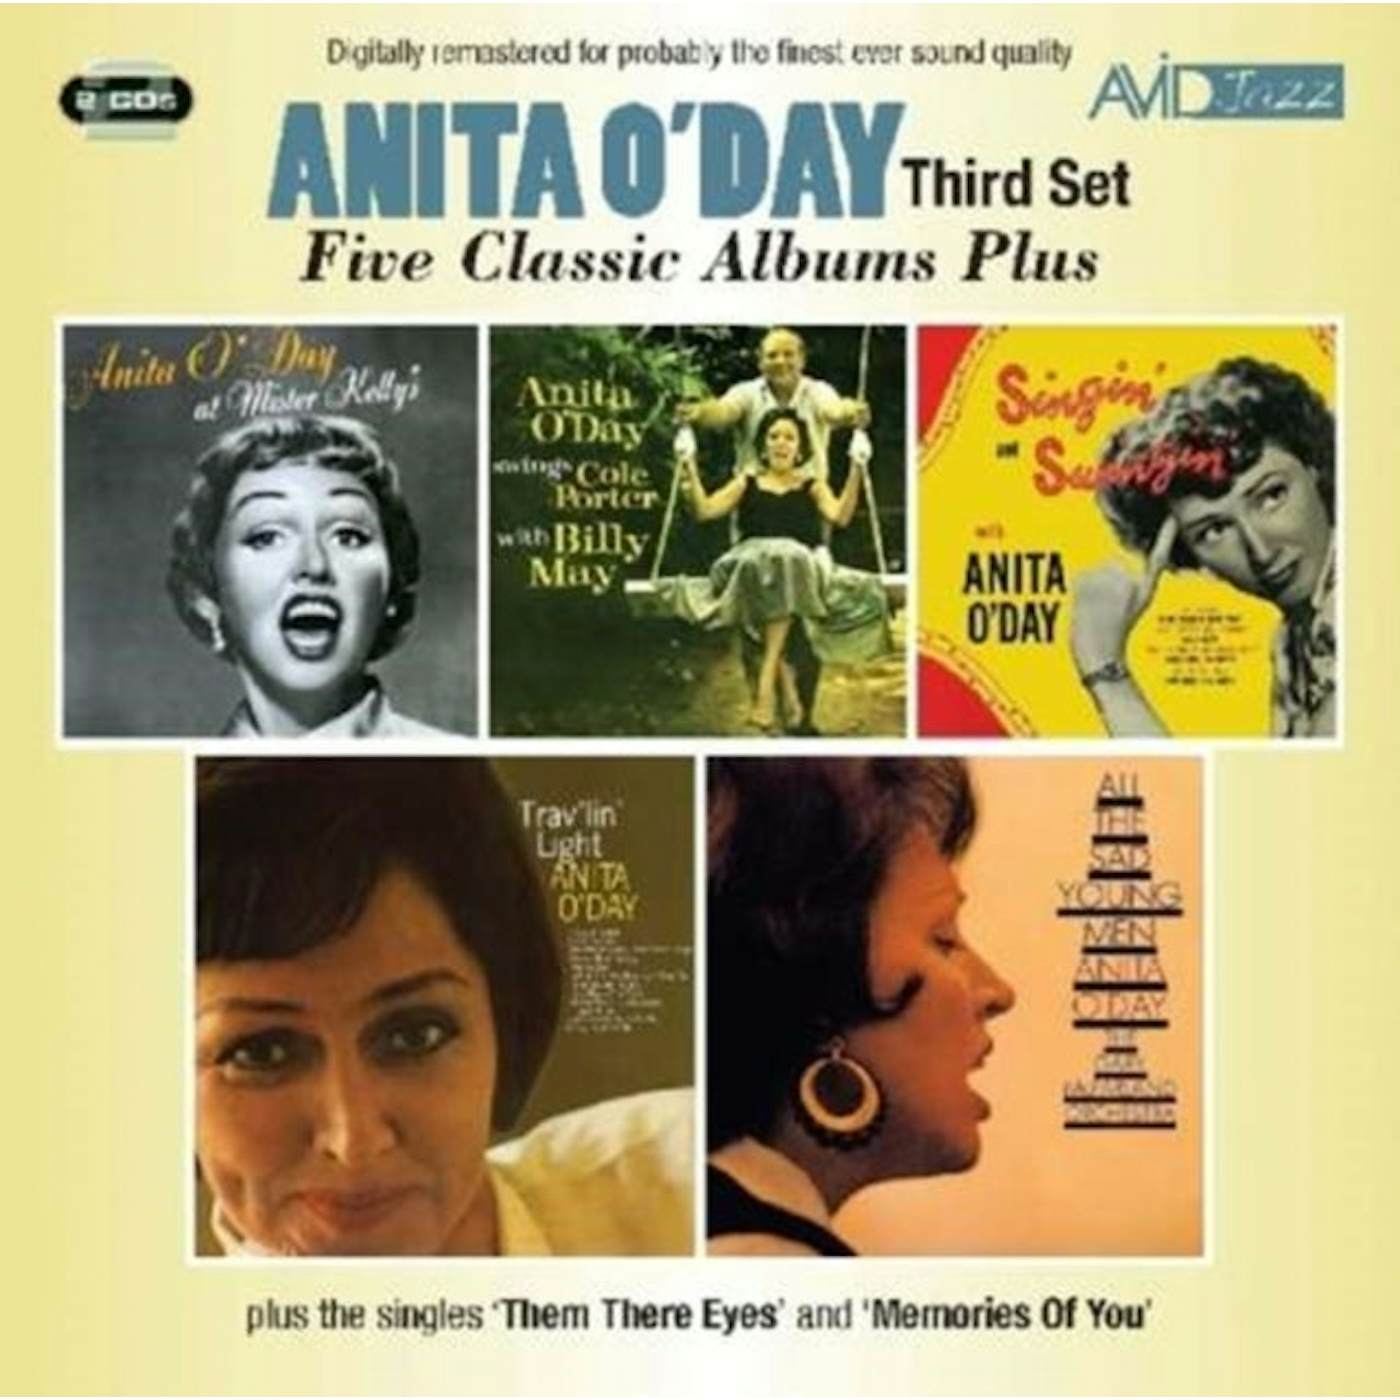 Anita O'day CD - Five Classic Albums Plus (Anita O'day Swings Cole Porter With Billy May / At Mister Kelly's / Singin' And Swingin' / Trav'lin' Light / All The Sad Young Men)